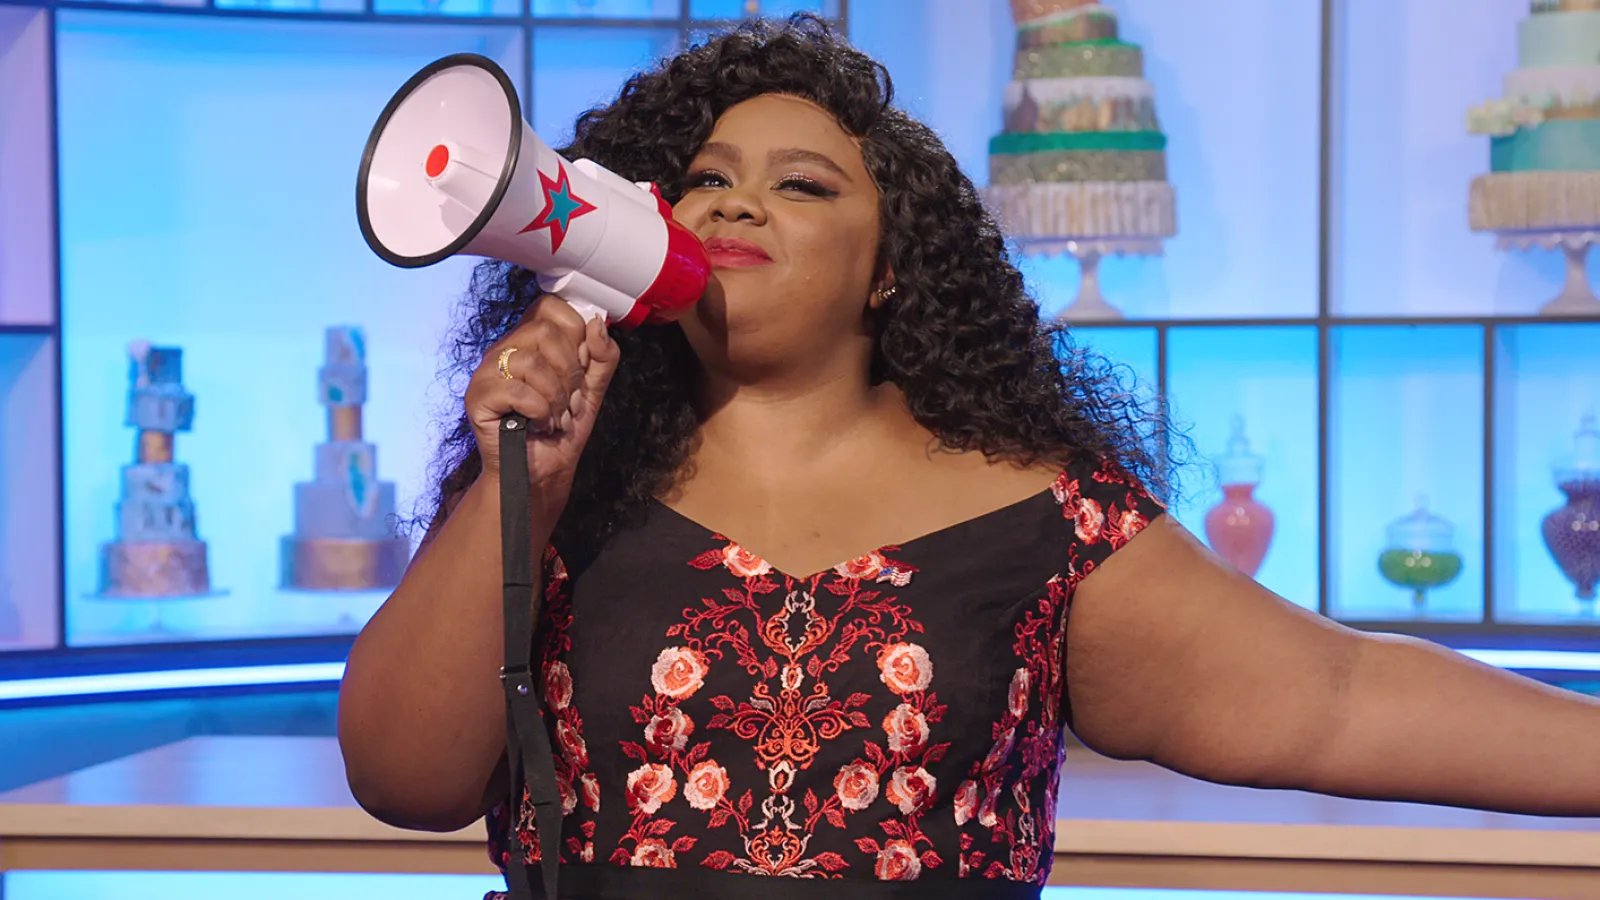 nicole byer with a megaphone on the set of nailed it!